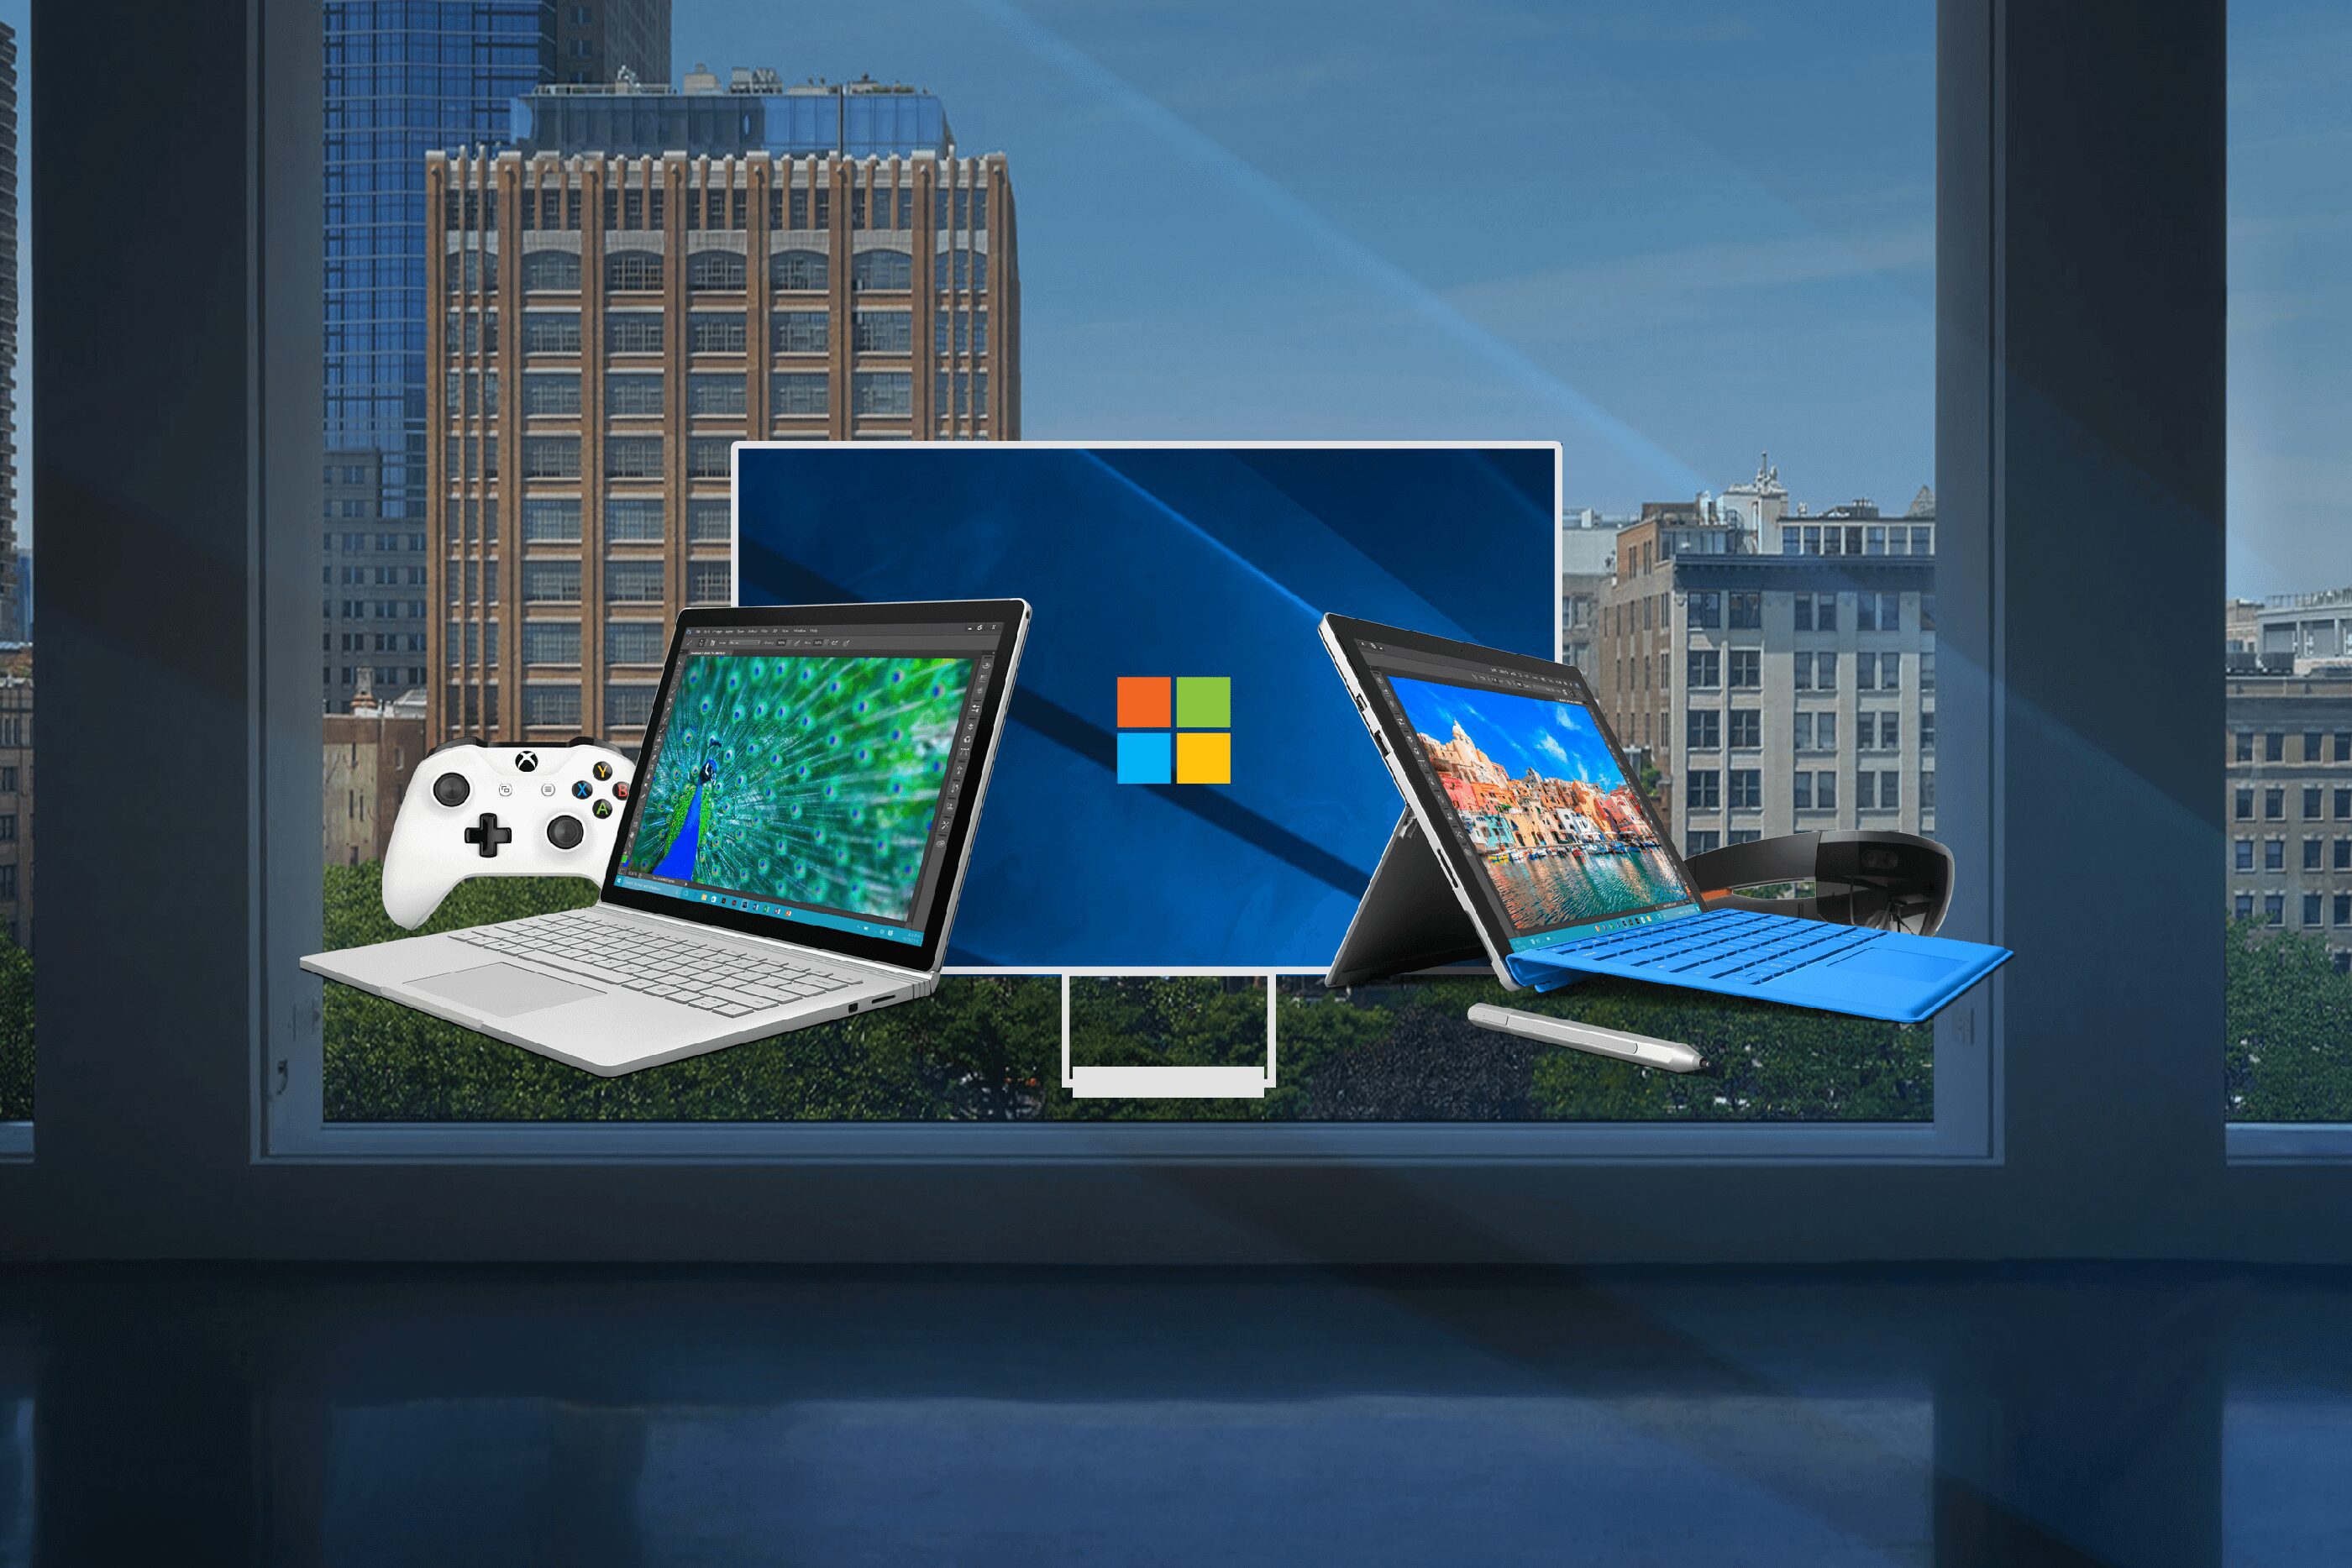 What to expect from Microsoft’s Windows 10 event on October 26th